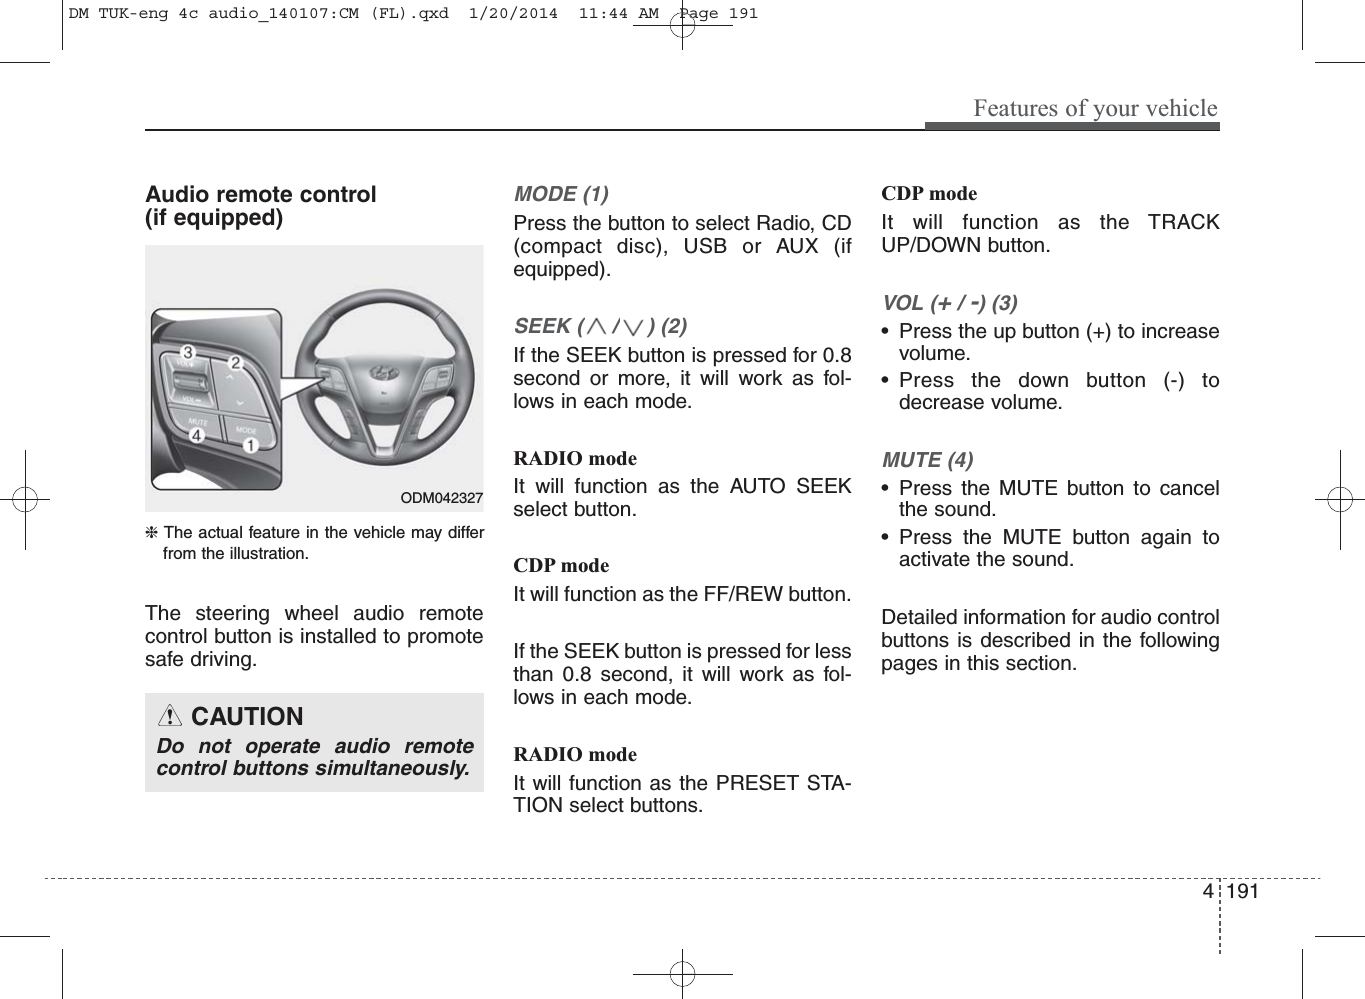 4 191Features of your vehicleAudio remote control (if equipped) ❈ The actual feature in the vehicle may differfrom the illustration.The steering wheel audio remotecontrol button is installed to promotesafe driving. MODE (1)Press the button to select Radio, CD(compact disc), USB or AUX (ifequipped).SEEK ( / ) (2)If the SEEK button is pressed for 0.8second or more, it will work as fol-lows in each mode.RADIO modeIt will function as the AUTO SEEKselect button.CDP modeIt will function as the FF/REW button.If the SEEK button is pressed for lessthan 0.8 second, it will work as fol-lows in each mode.RADIO modeIt will function as the PRESET STA-TION select buttons.CDP modeIt will function as the TRACKUP/DOWN button.VOL (+/ -) (3)• Press the up button (+) to increasevolume.• Press the down button (-) todecrease volume.MUTE (4)• Press the MUTE button to cancelthe sound.• Press the MUTE button again toactivate the sound.Detailed information for audio controlbuttons is described in the followingpages in this section.CAUTIONDo not operate audio remotecontrol buttons simultaneously.ODM042327DM TUK-eng 4c audio_140107:CM (FL).qxd  1/20/2014  11:44 AM  Page 191